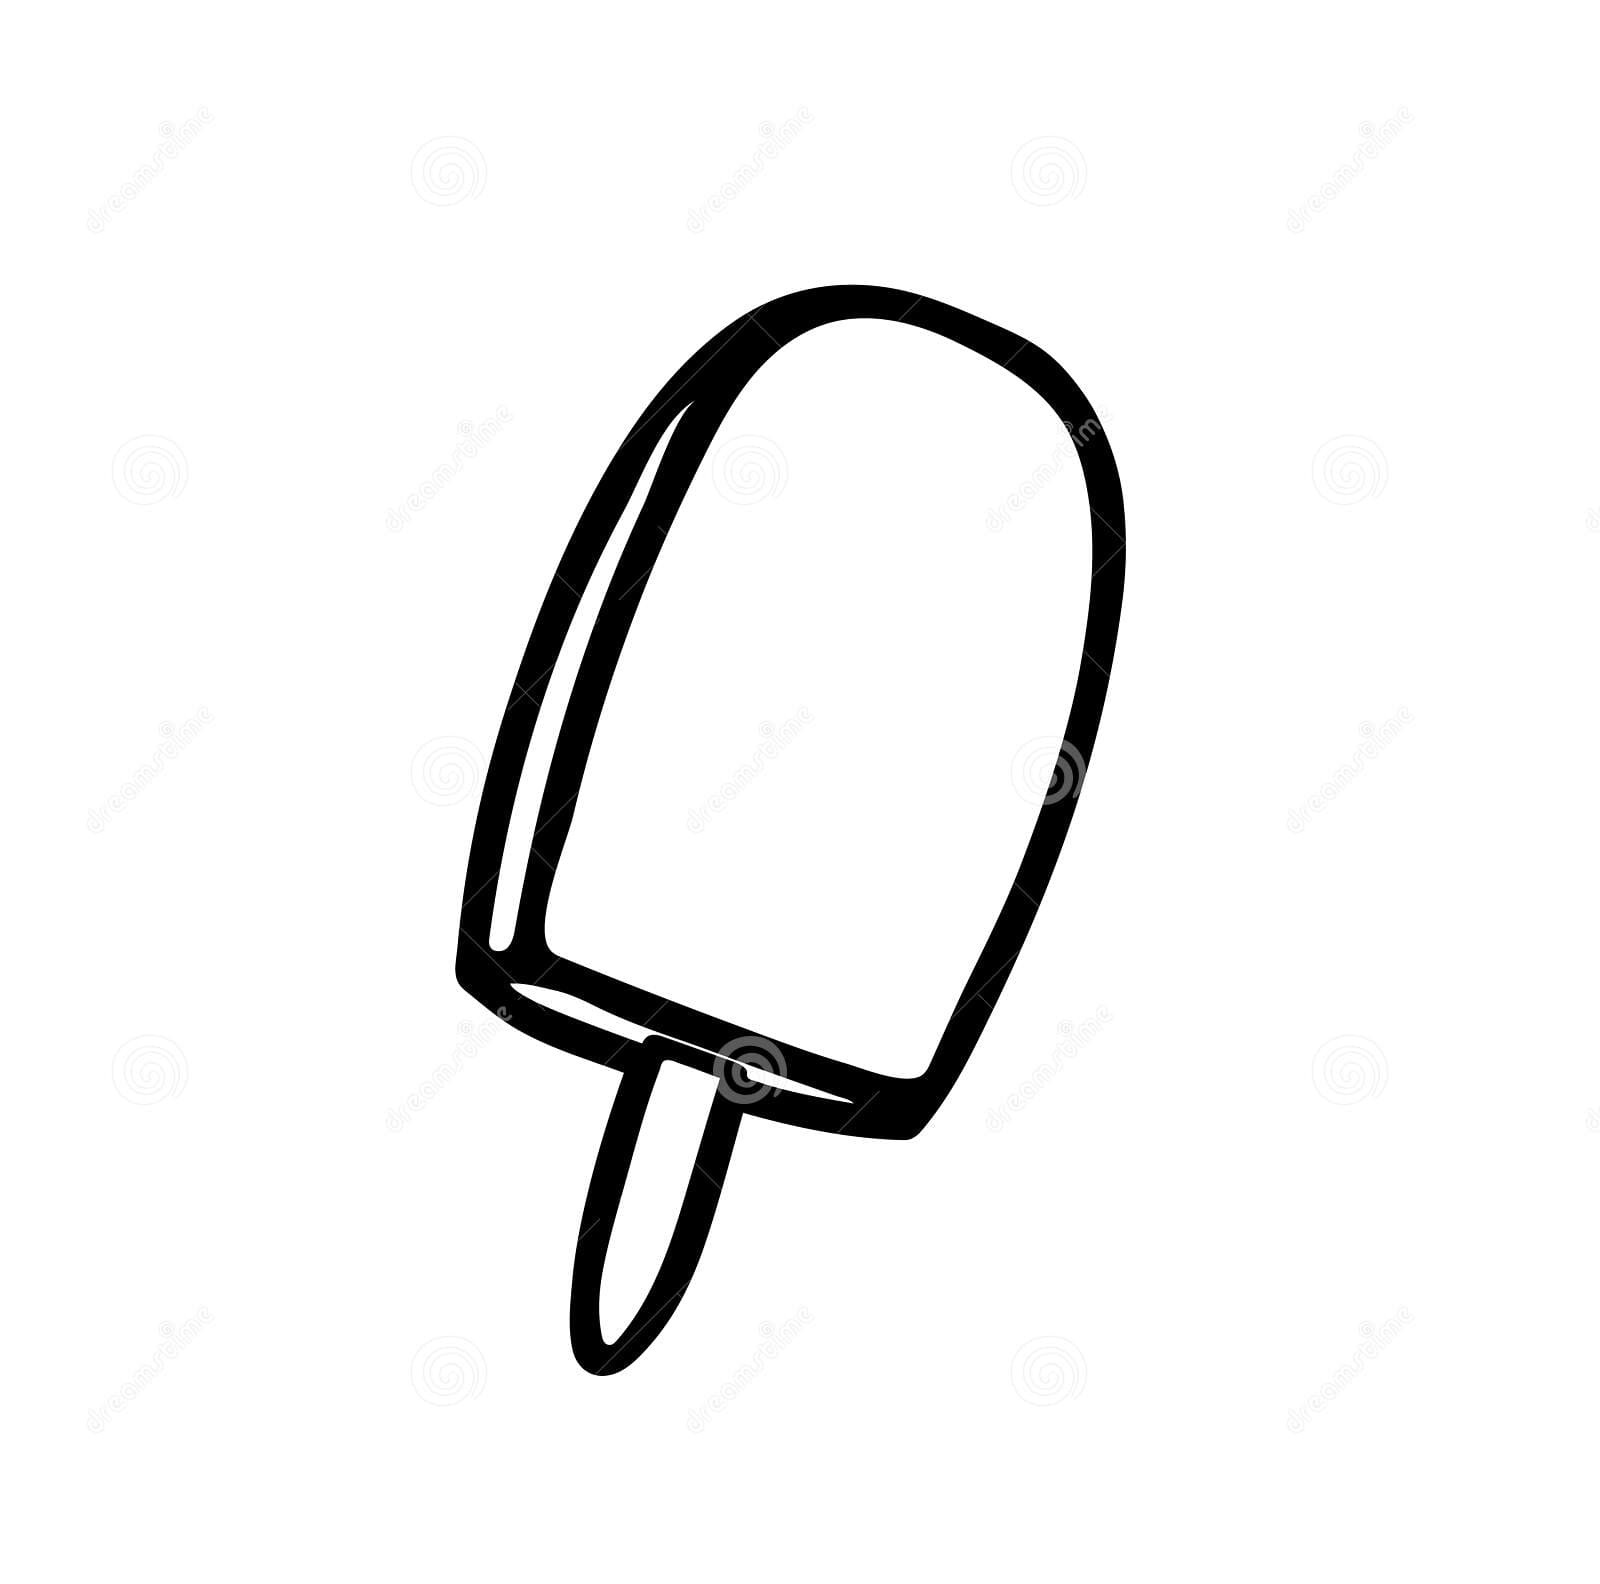 Popsicle With Chocolate And Syrup Image